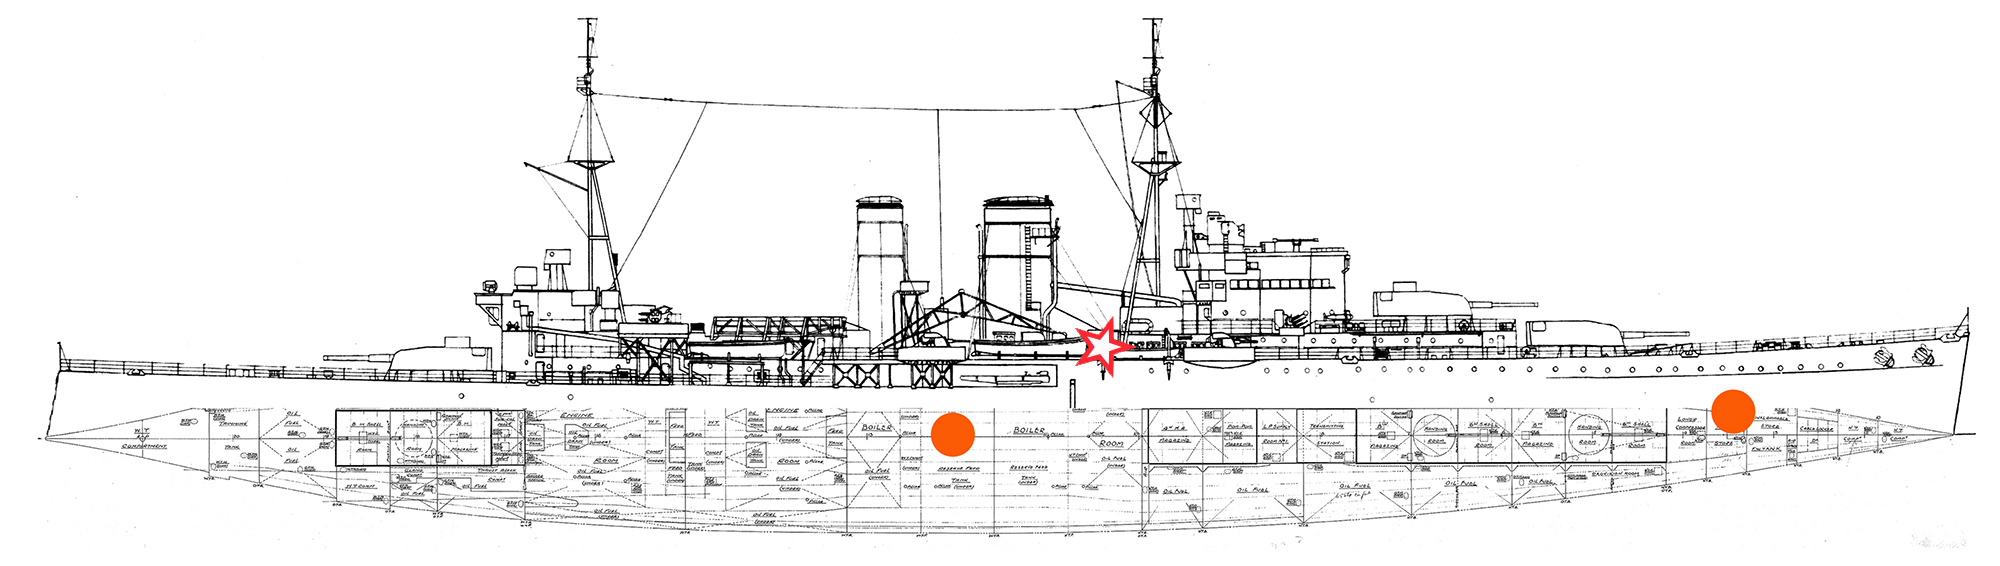 The red star shows the approximate location where the devastating shell hit and entered ‘A’ (or the forward) boiler room and knocked out all power to the ship, causing her abandonment. The red dots show the exact location of the two torpedo hit locations to starboard after the ship had been abandoned. The one amidships hit into the ‘B’ (or aft) boiler room, while the one to the bow hit just forward of the breakwater in front of ‘A’ turret, almost severing the bow.